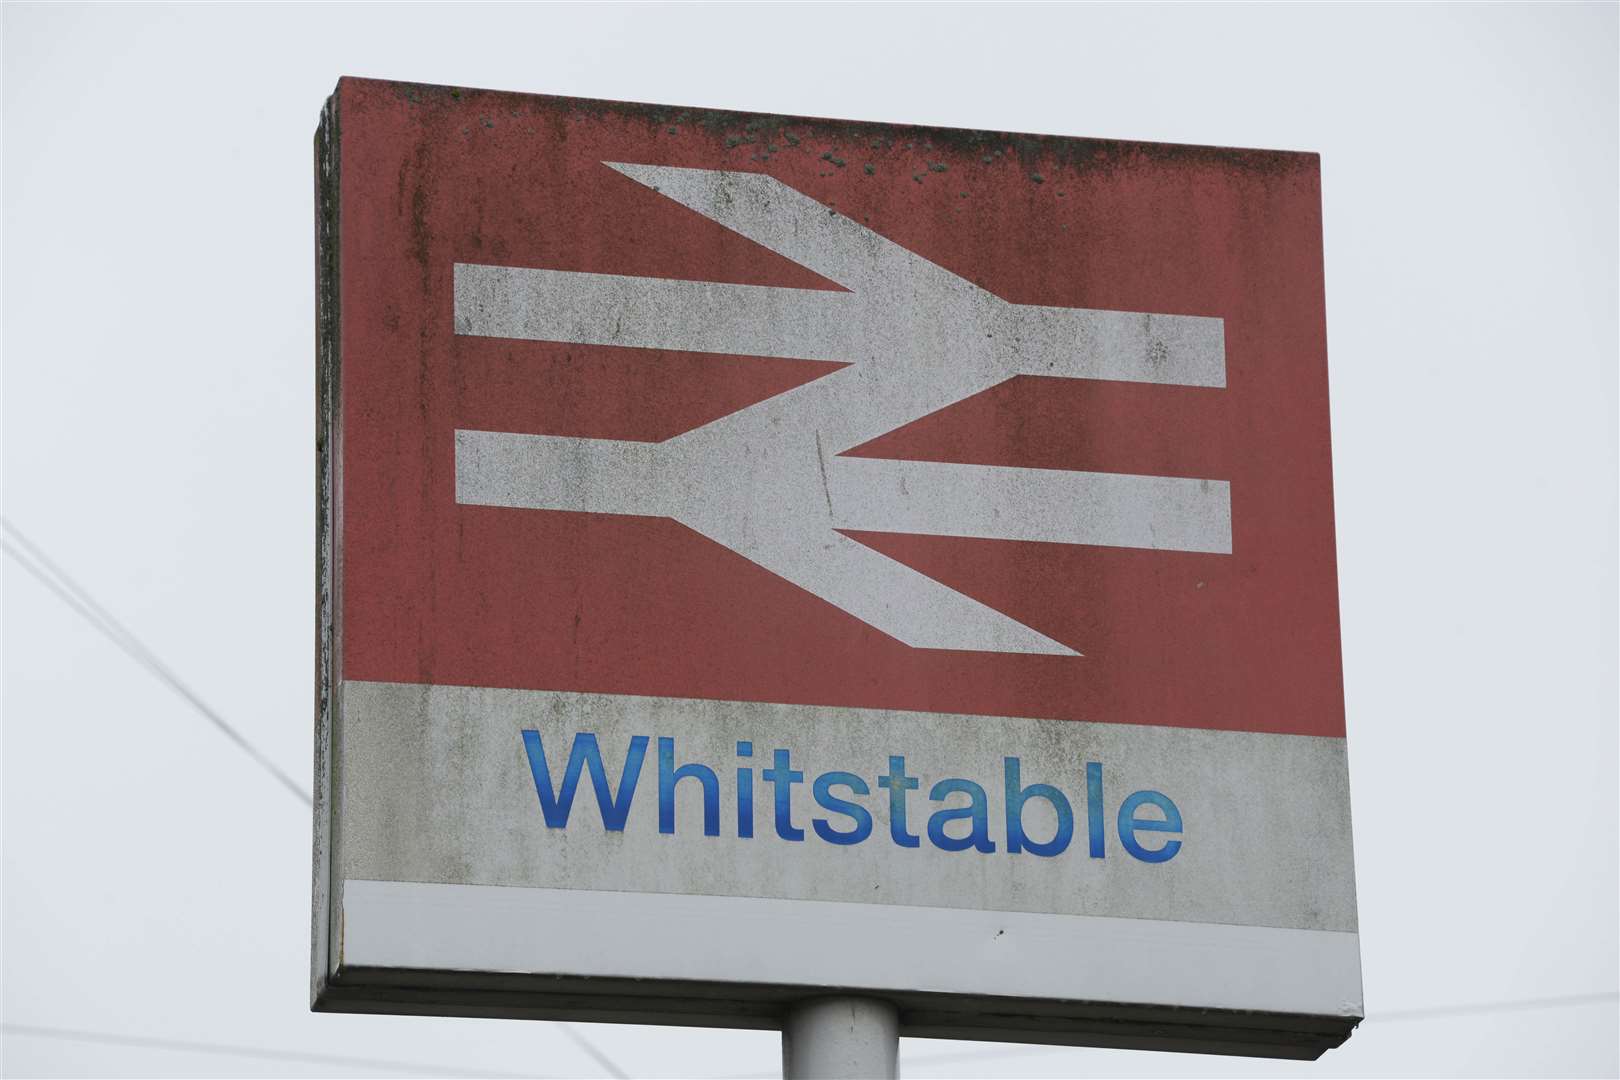 The incident happened at Whitstable station